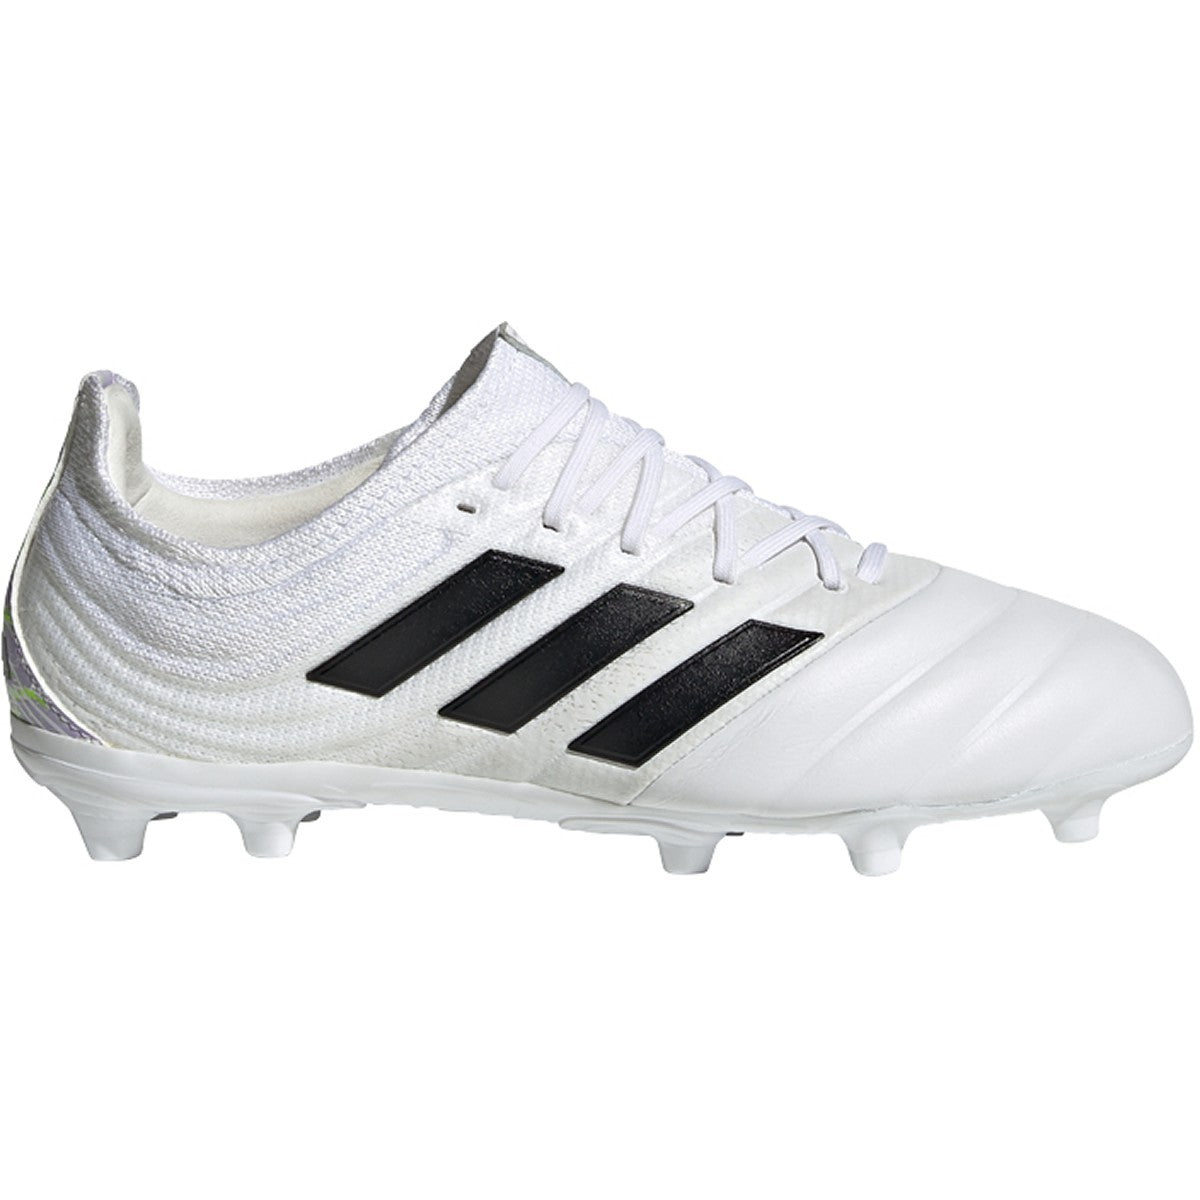 adidas copa 20.1 fg firm ground soccer cleat